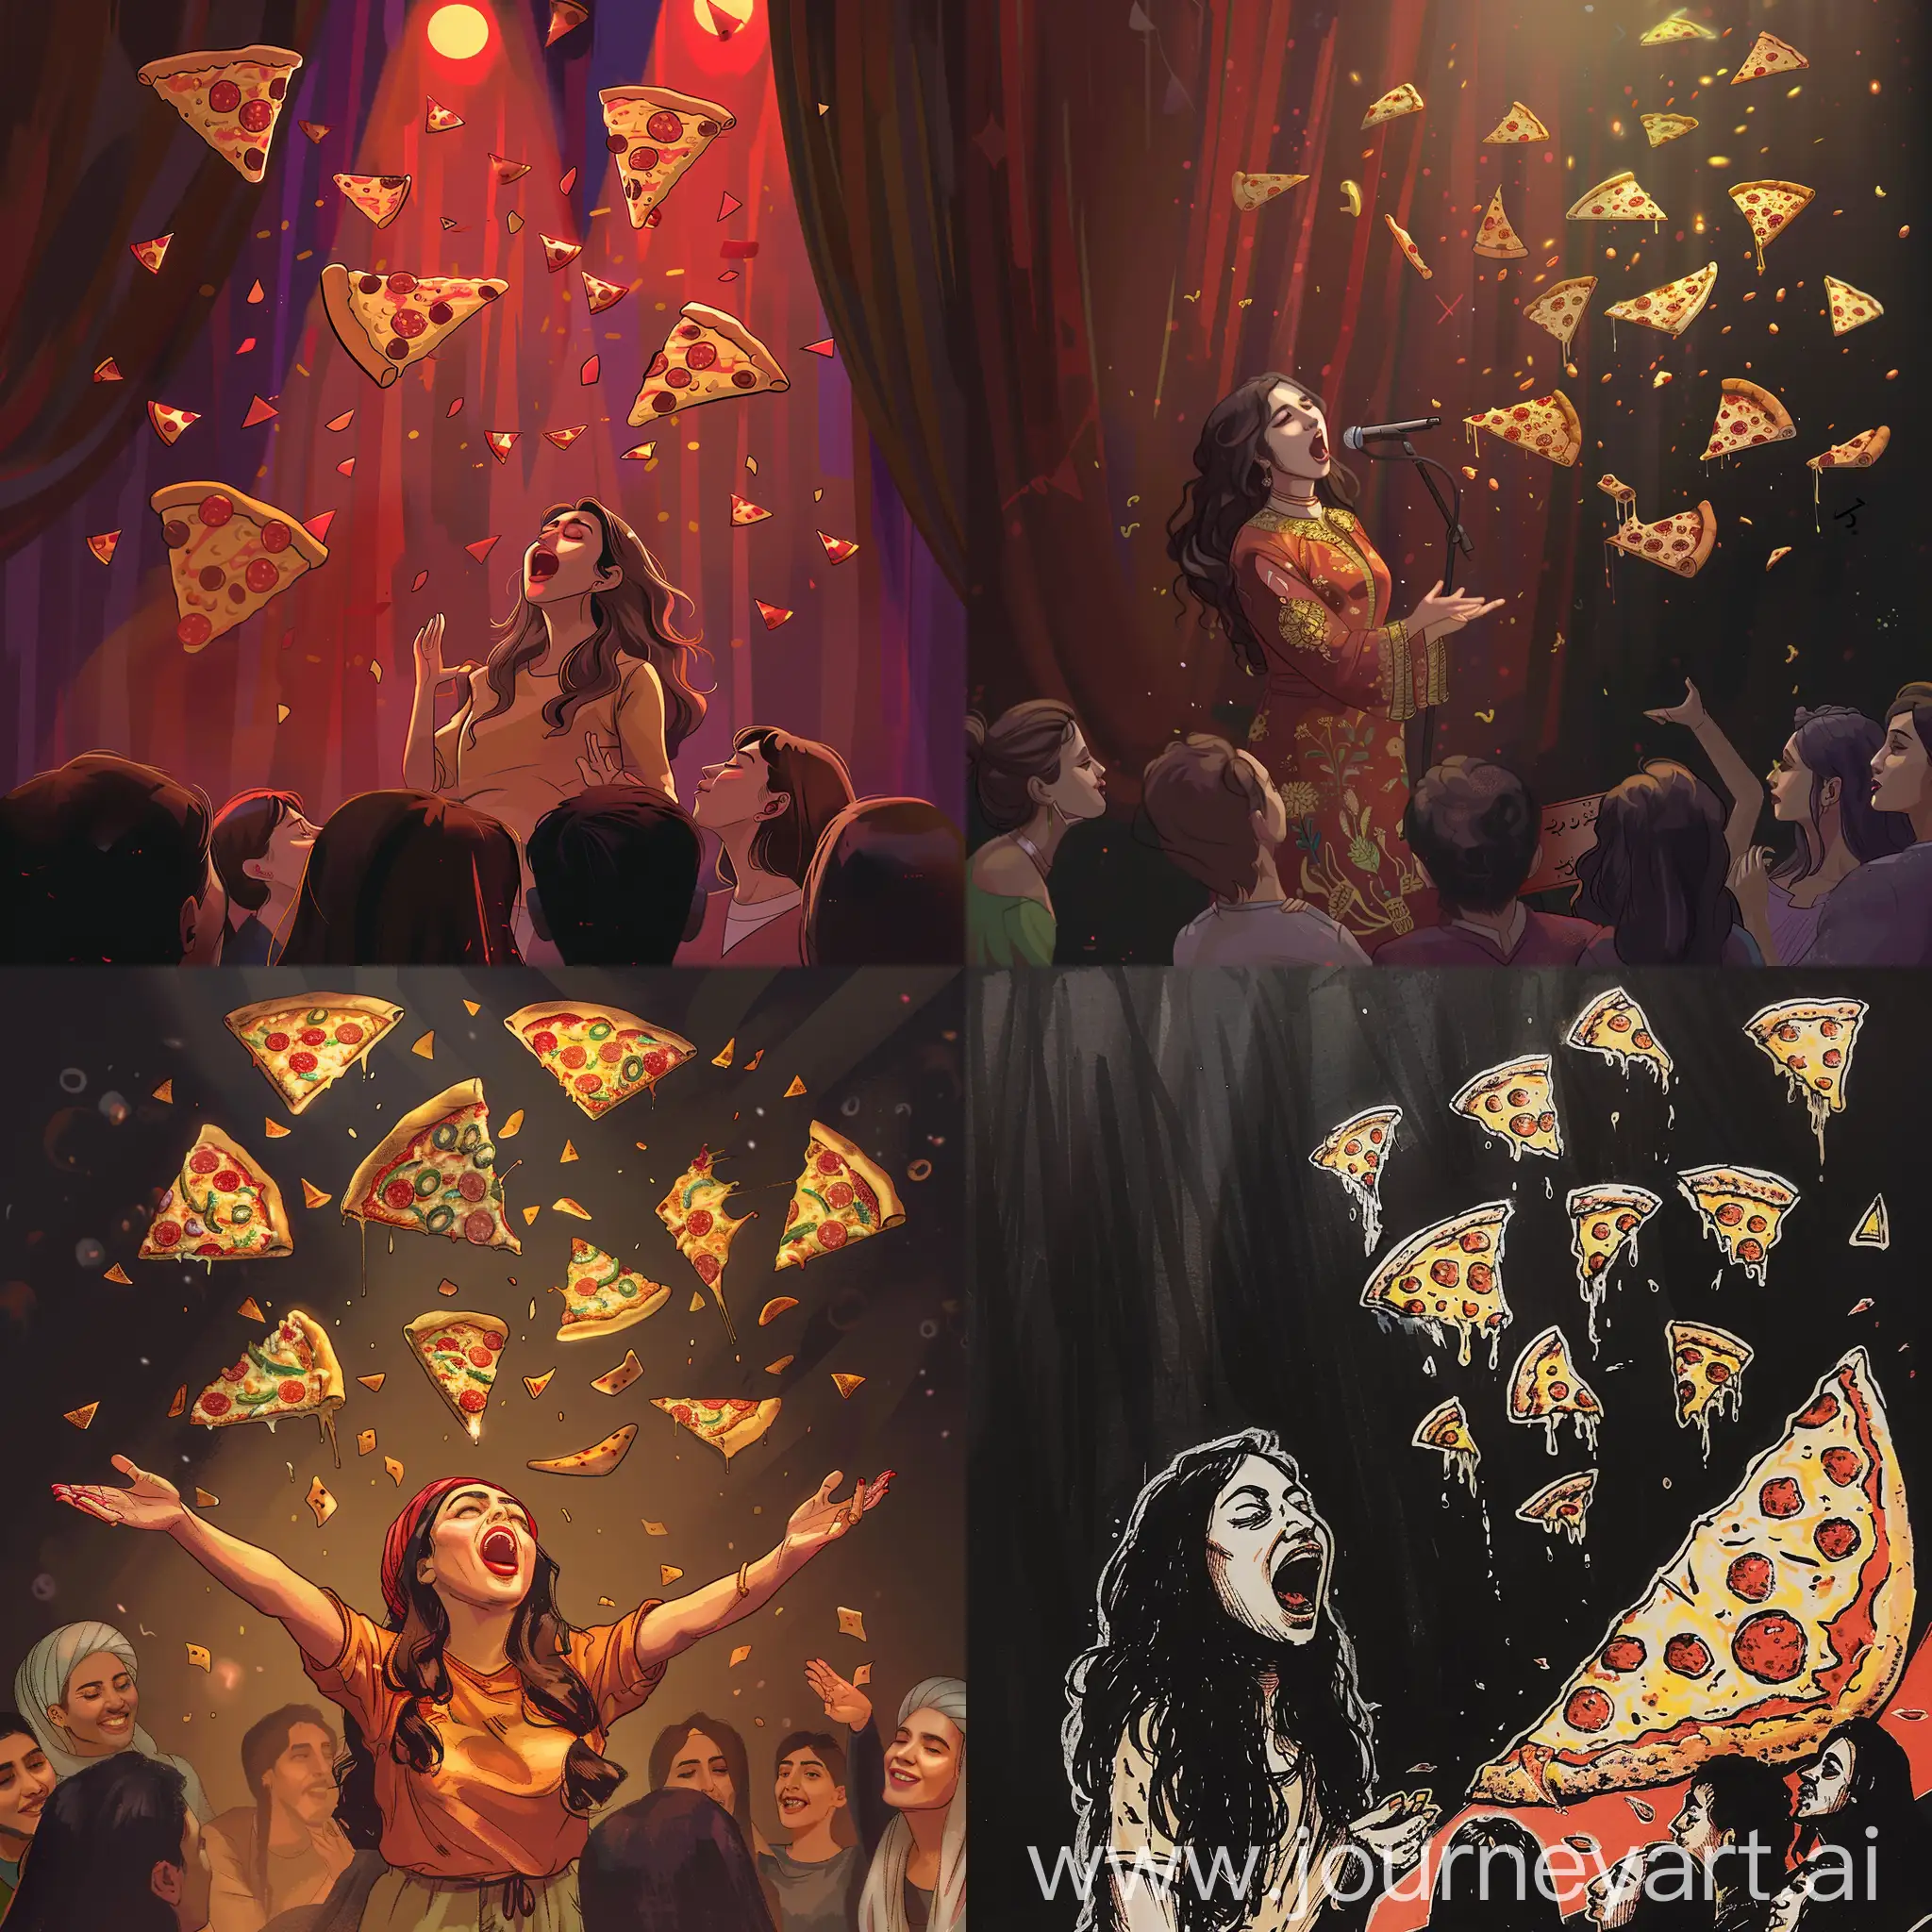 I want to draw a scene where an Iranian female singer is singing and pizza is falling from our name for the audience.